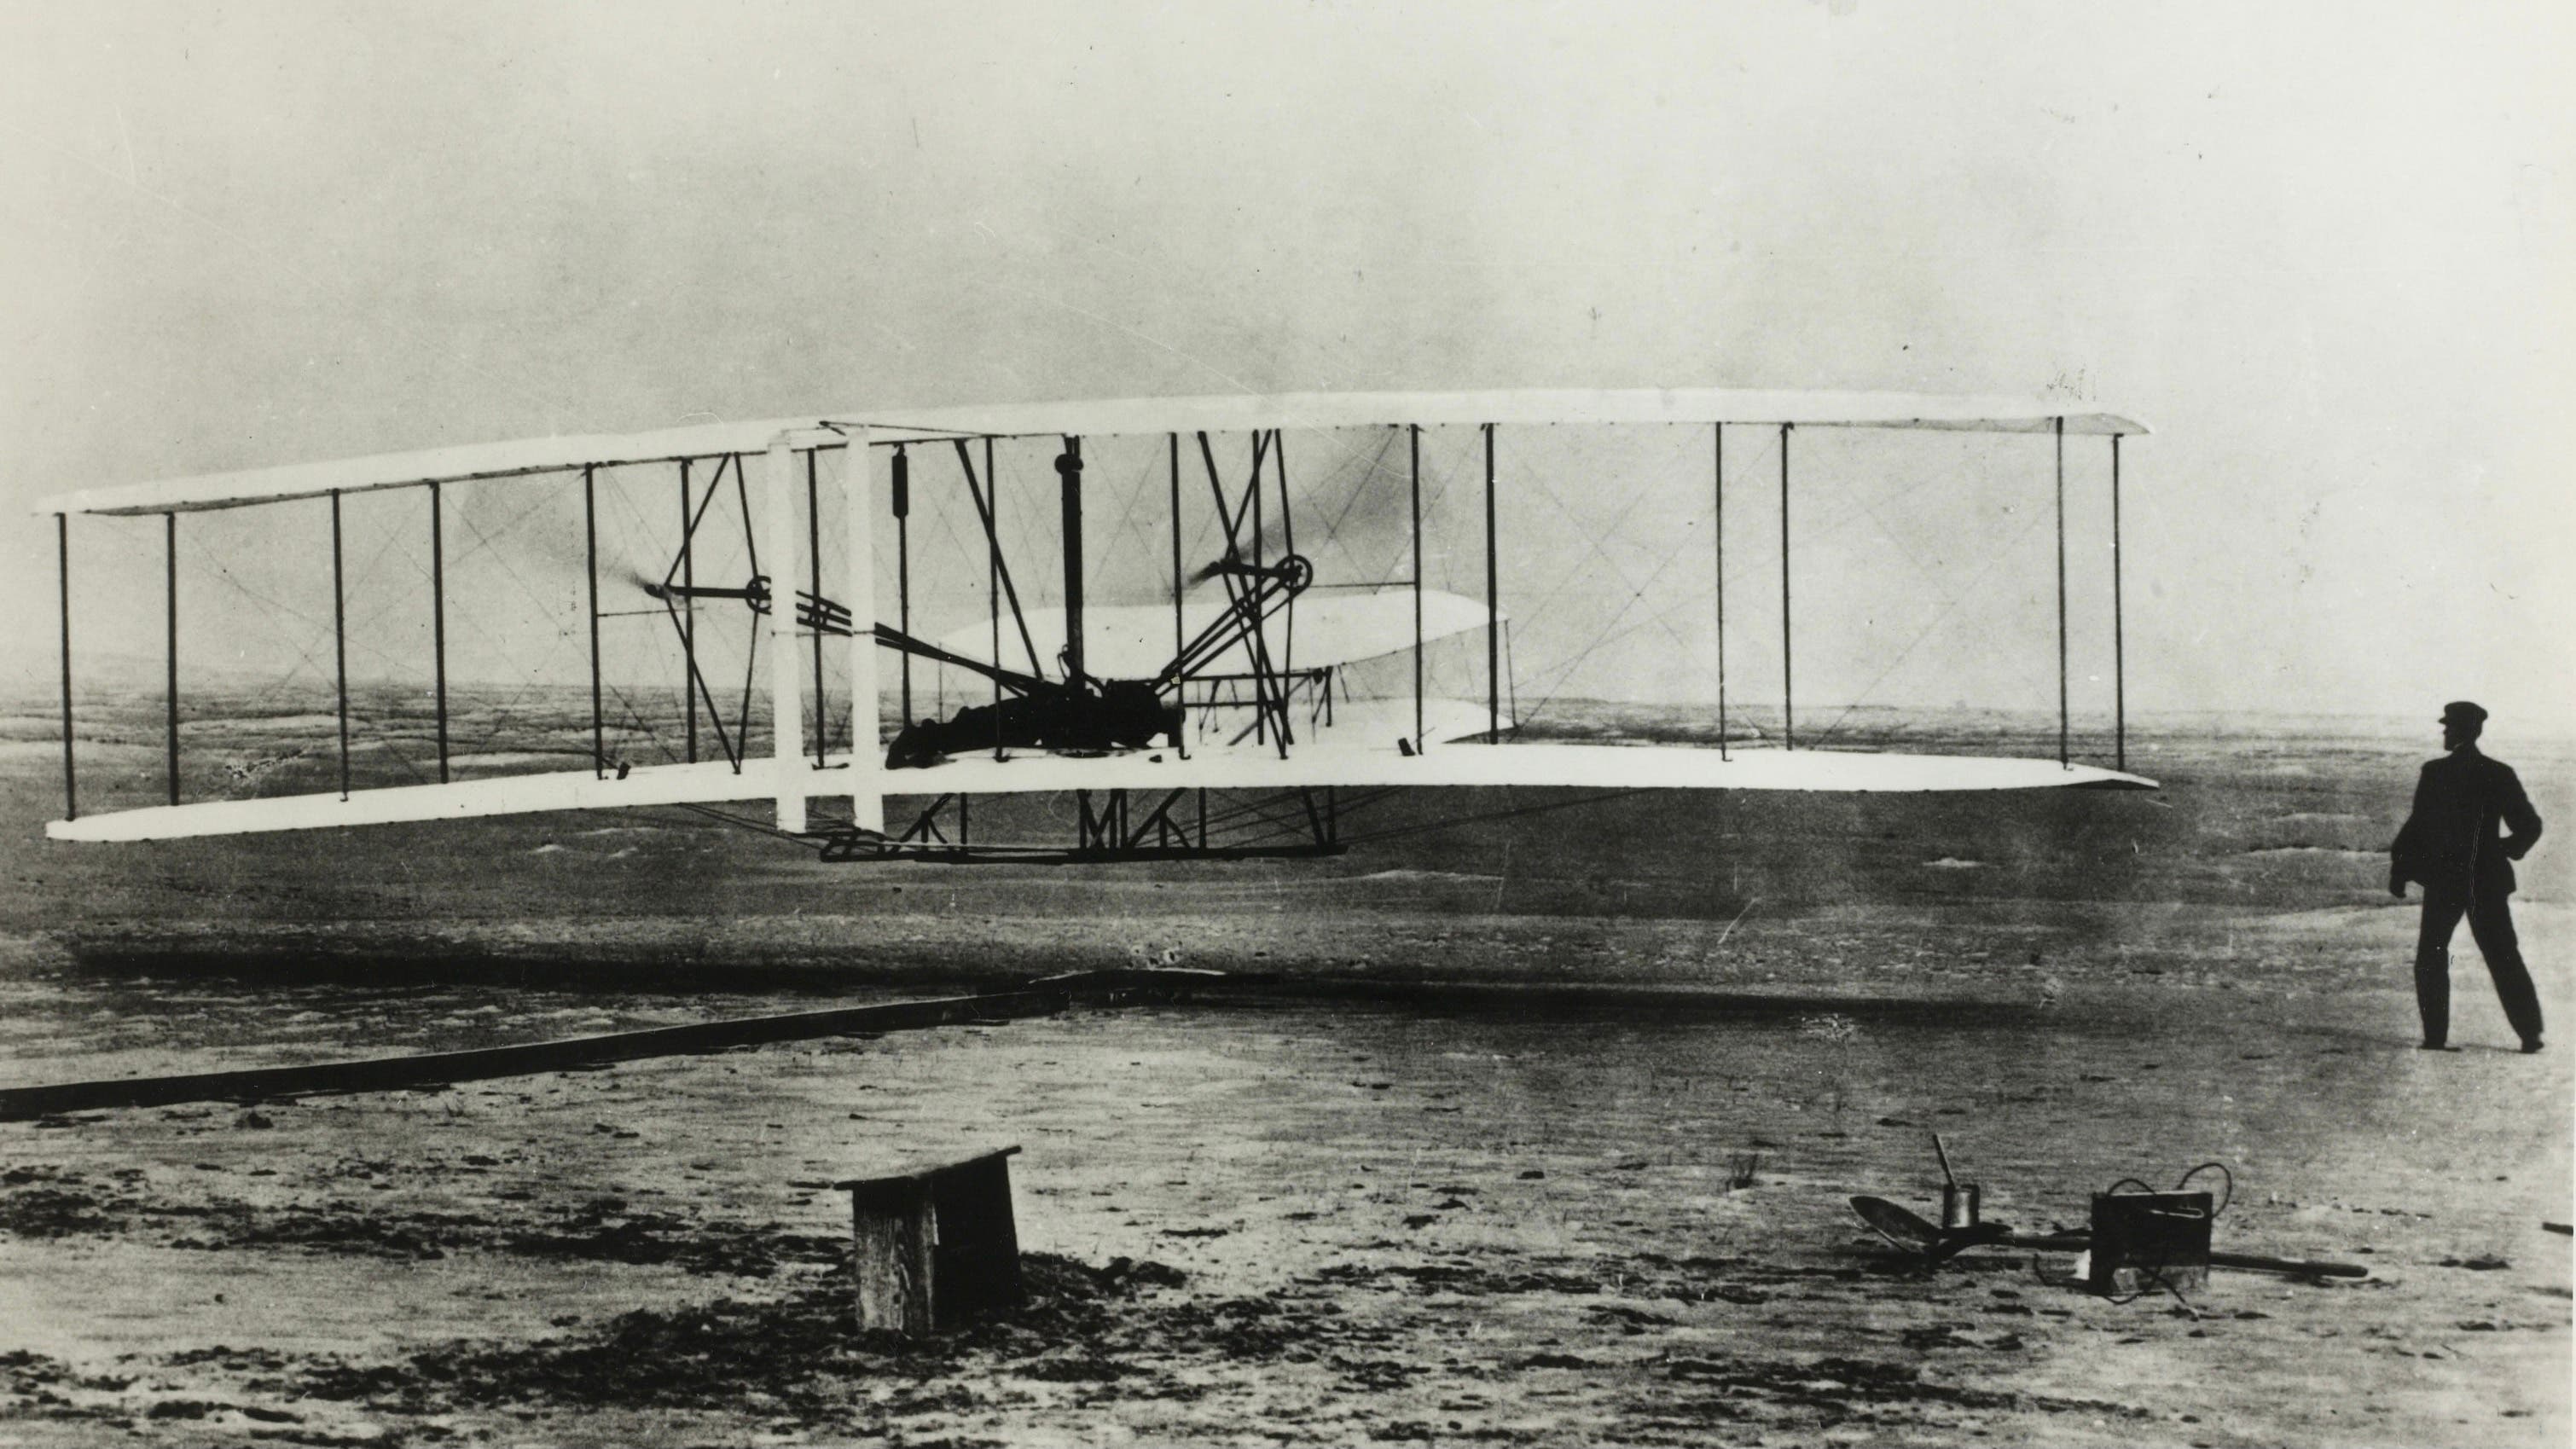 December 17th, 1903, Kittyhawk, North Carolina: The World's first flight with Orville Wright at the controls. His brother Wilbur is running at the side of the machine.